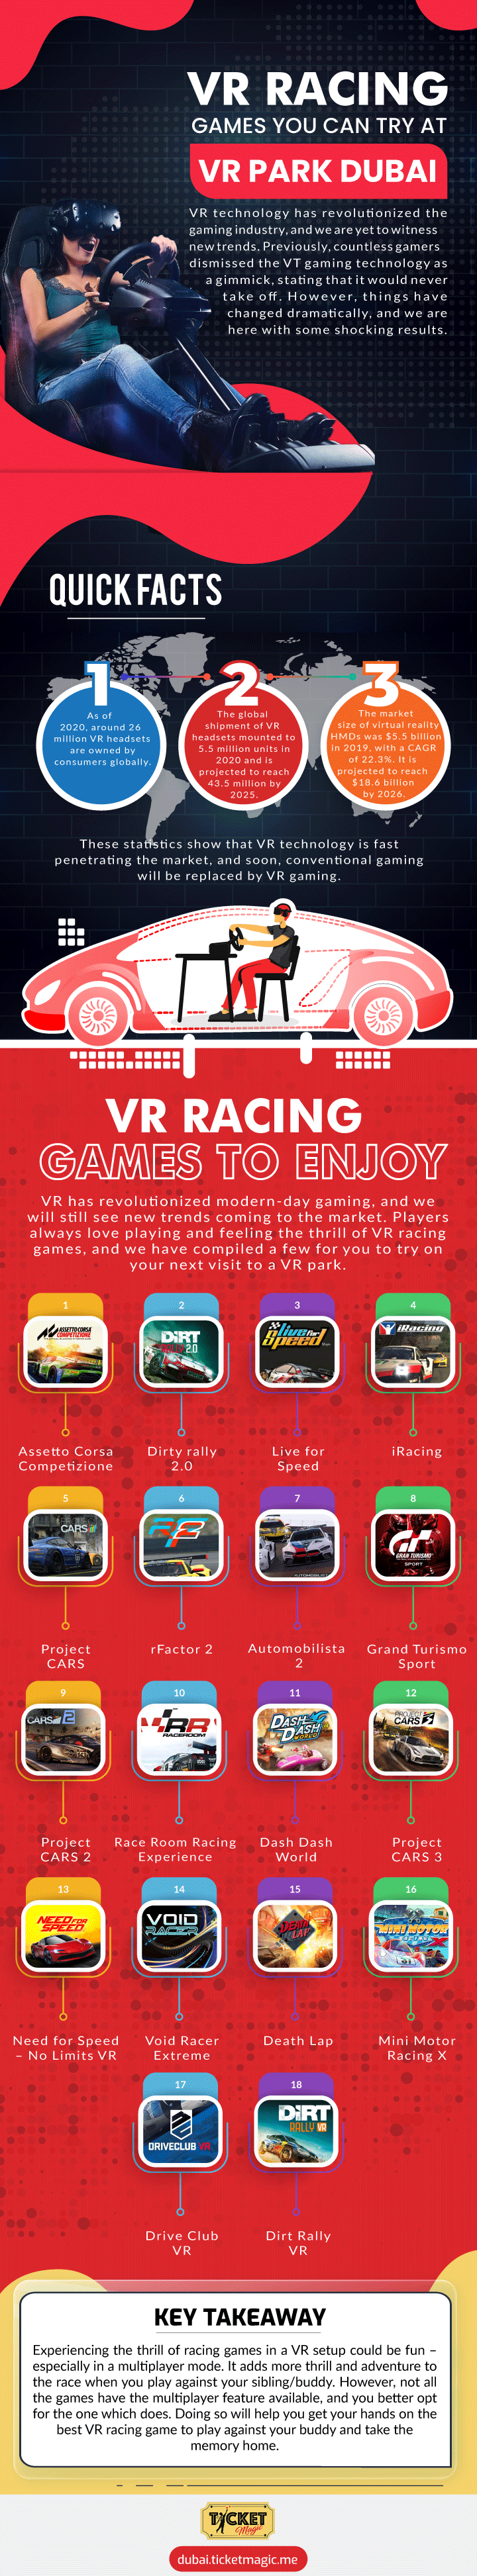 VR Racing games you can try at VR Park Dubai – Online Ticketing Experience